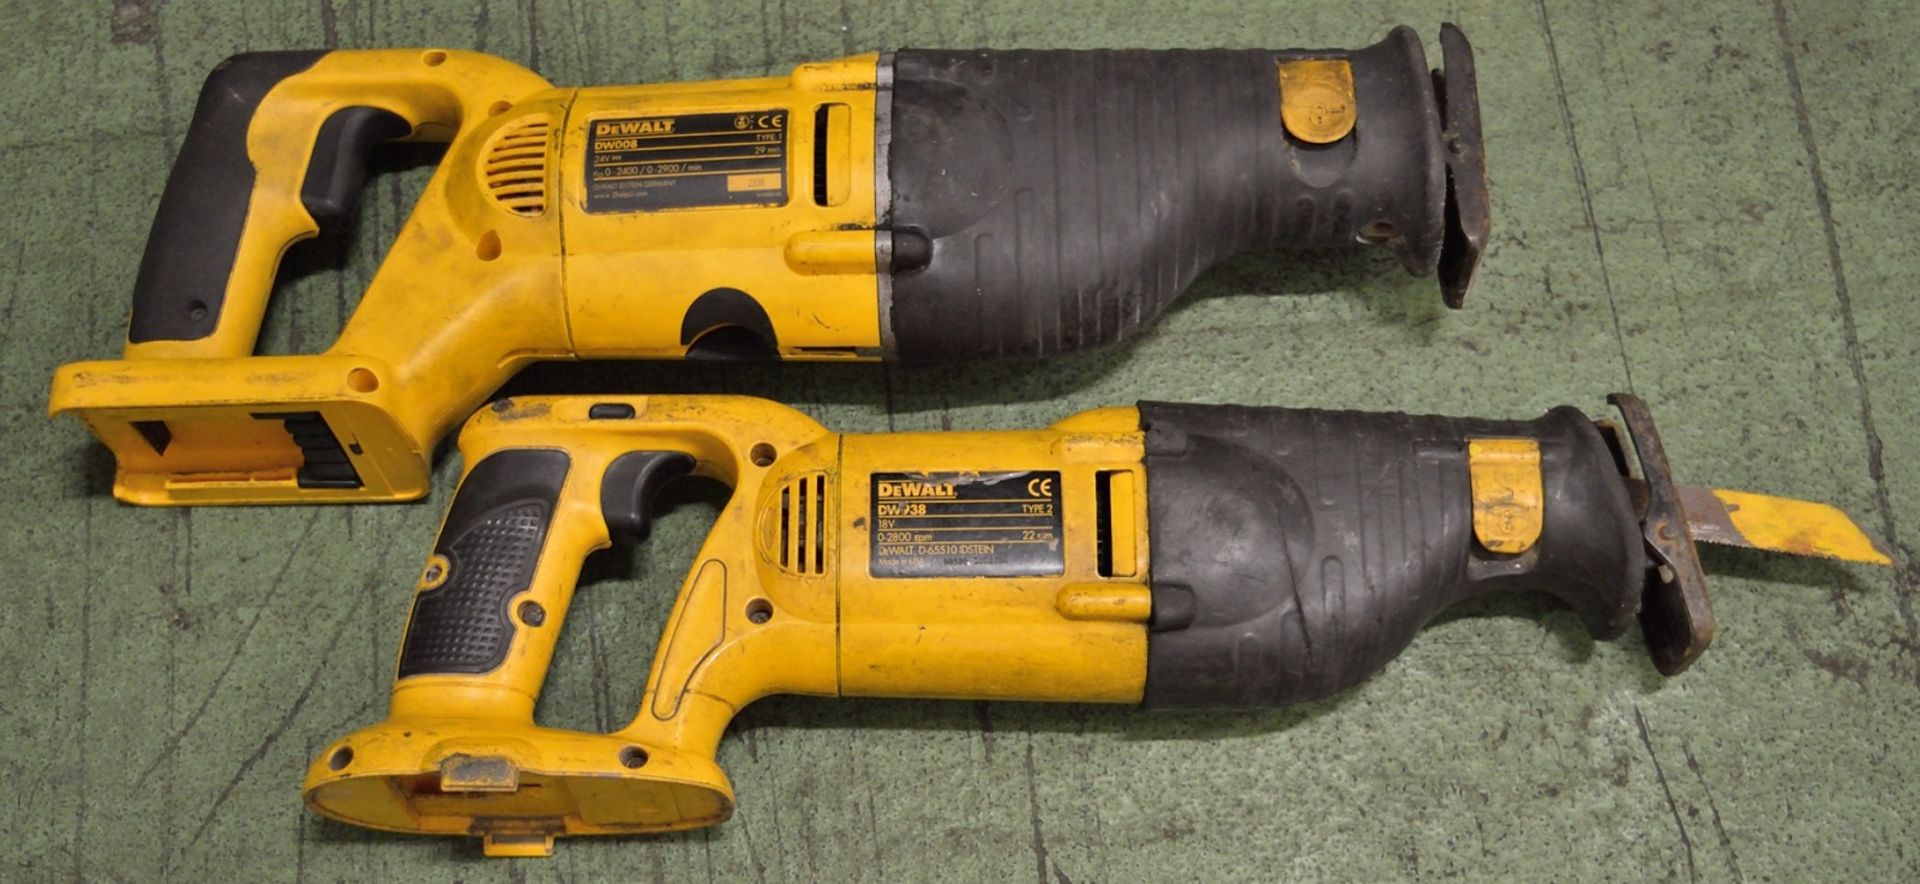 DeWalt Saw DW938 - No battery, DeWalt Saw DW008 - No battery. - Image 2 of 2